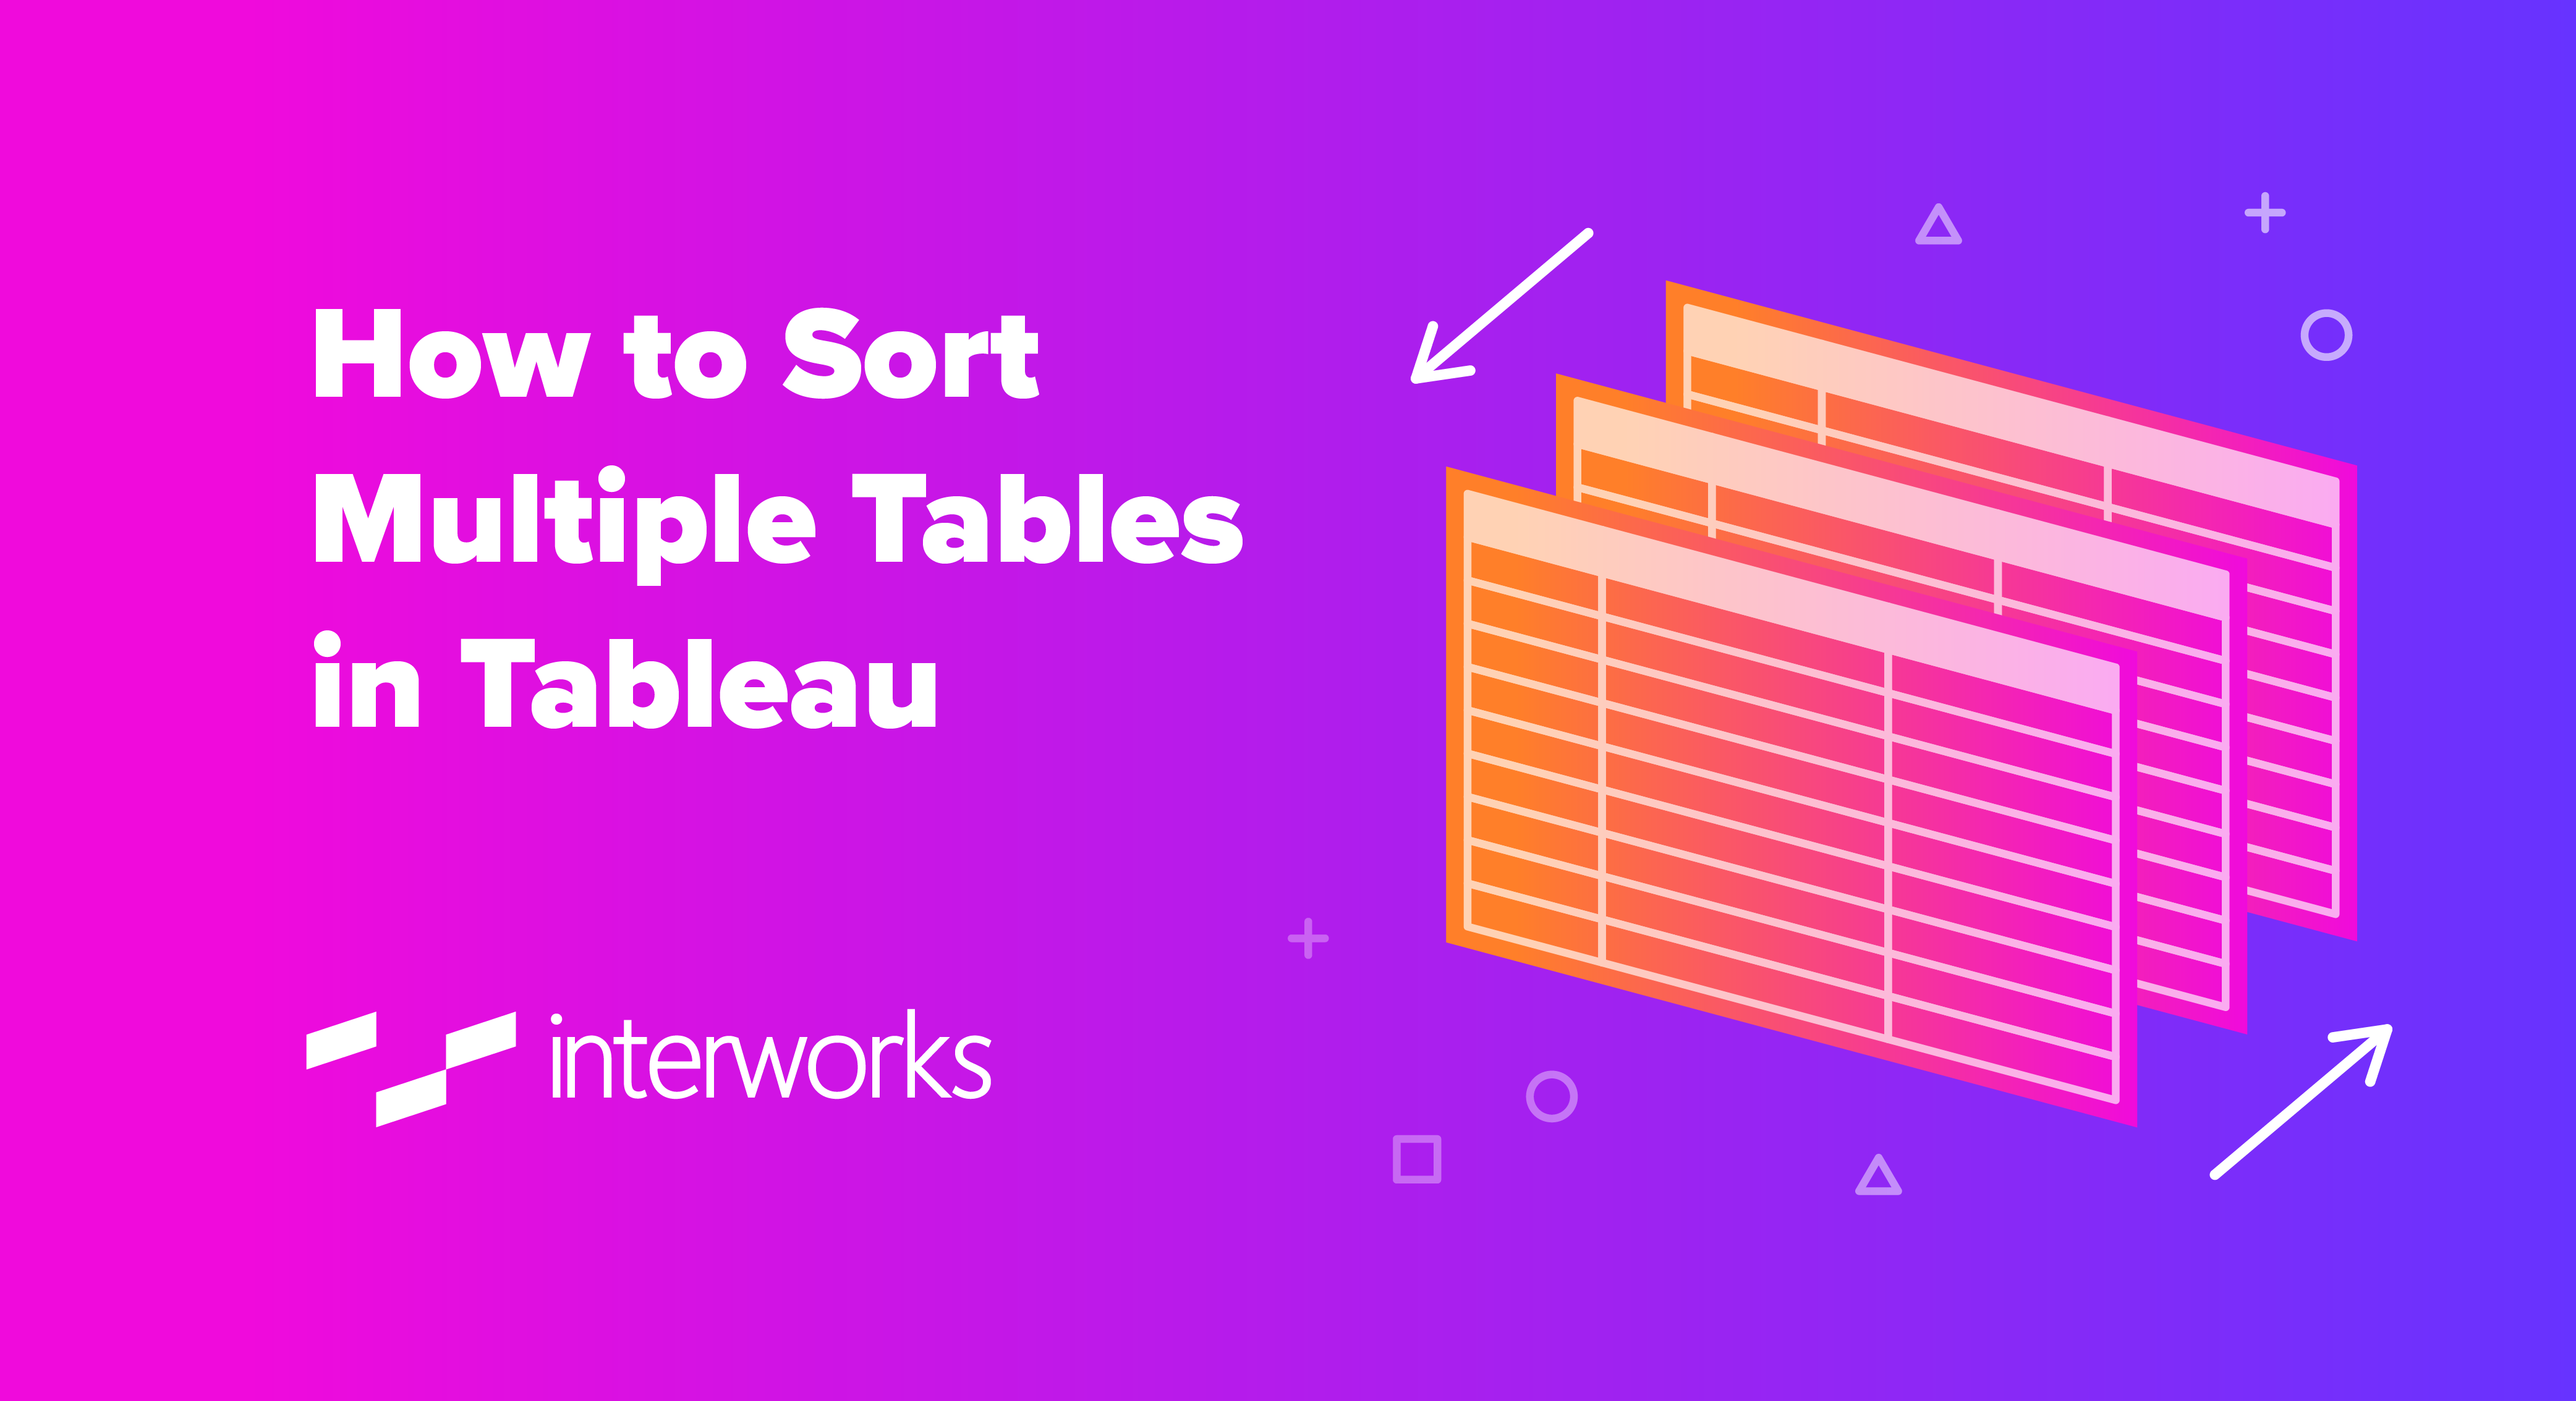 How to Sort Multiple Tables in Tableau